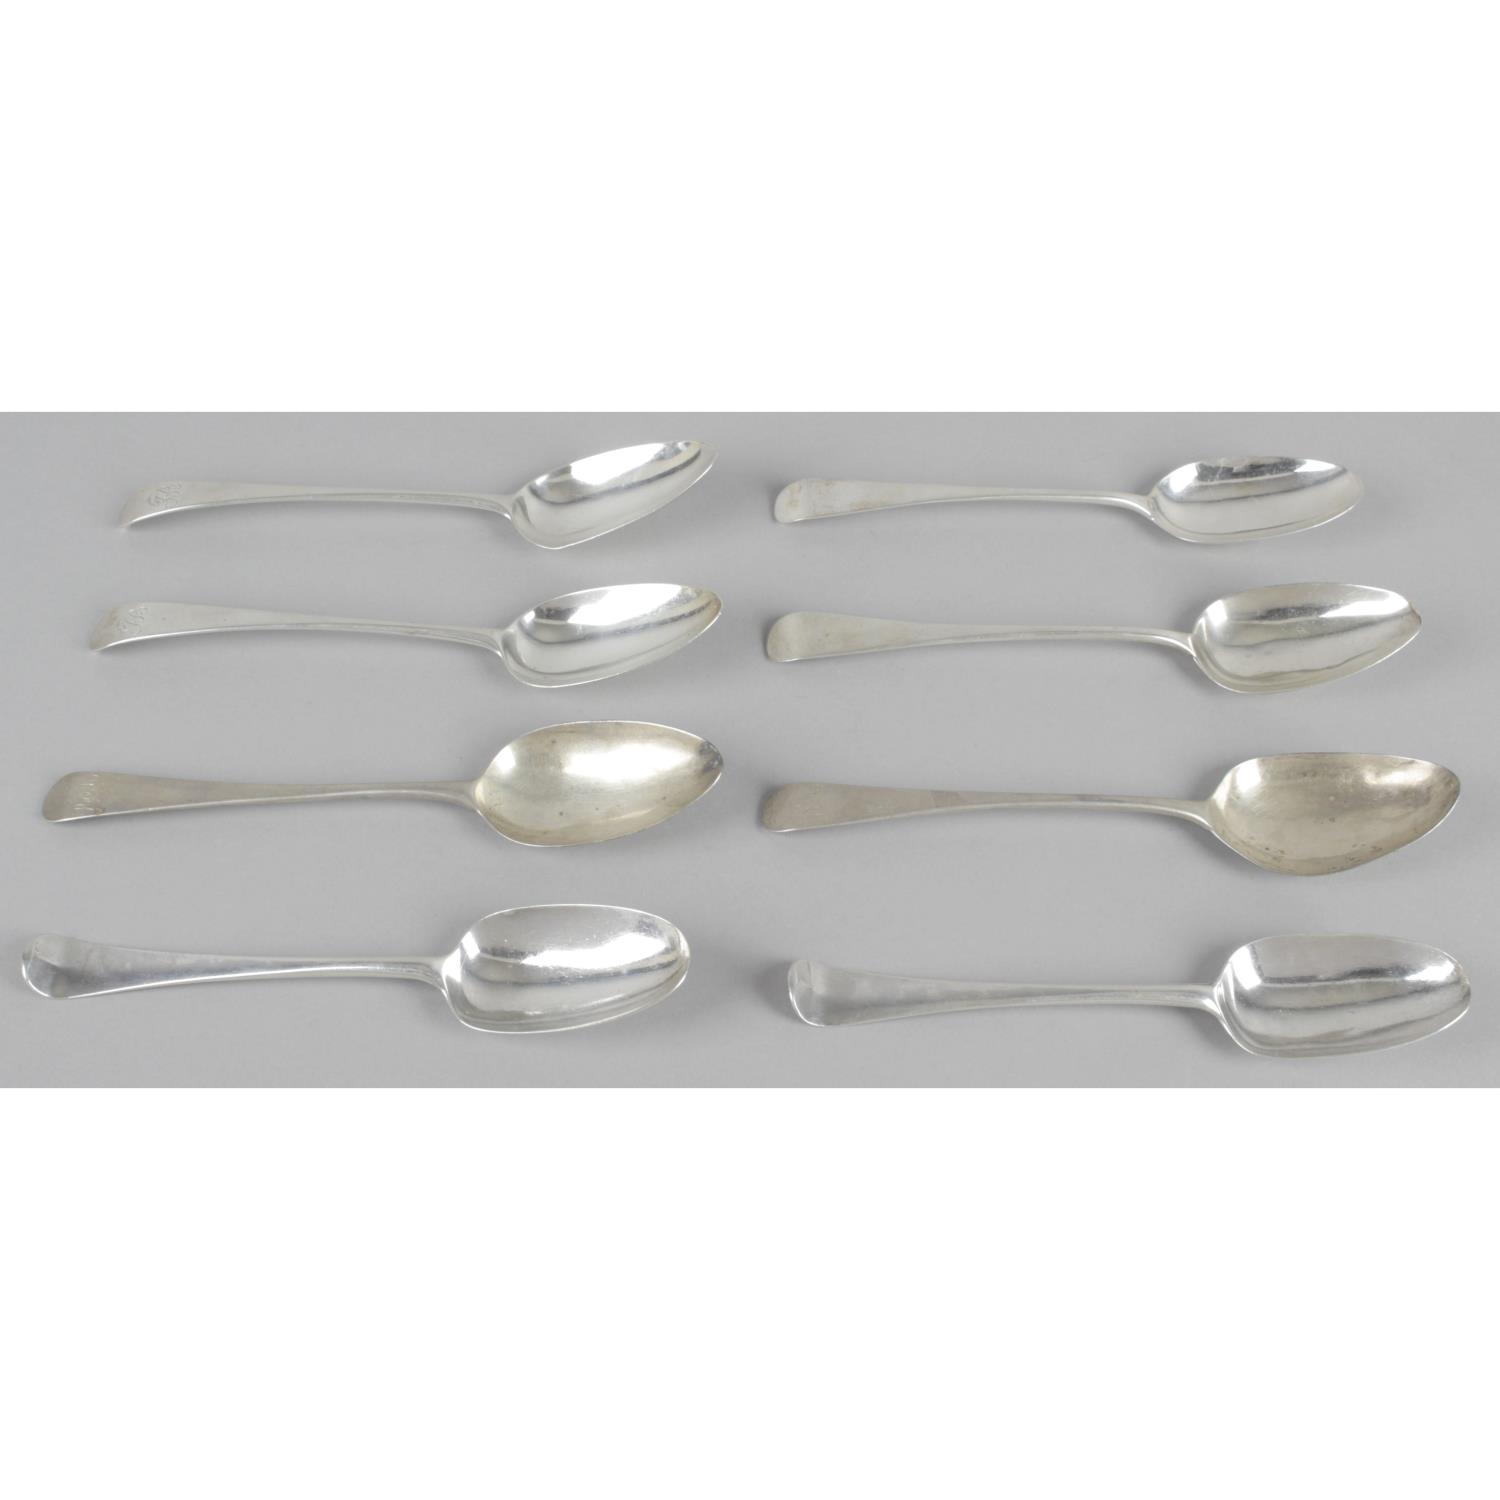 A selection of Old English pattern silver spoons,